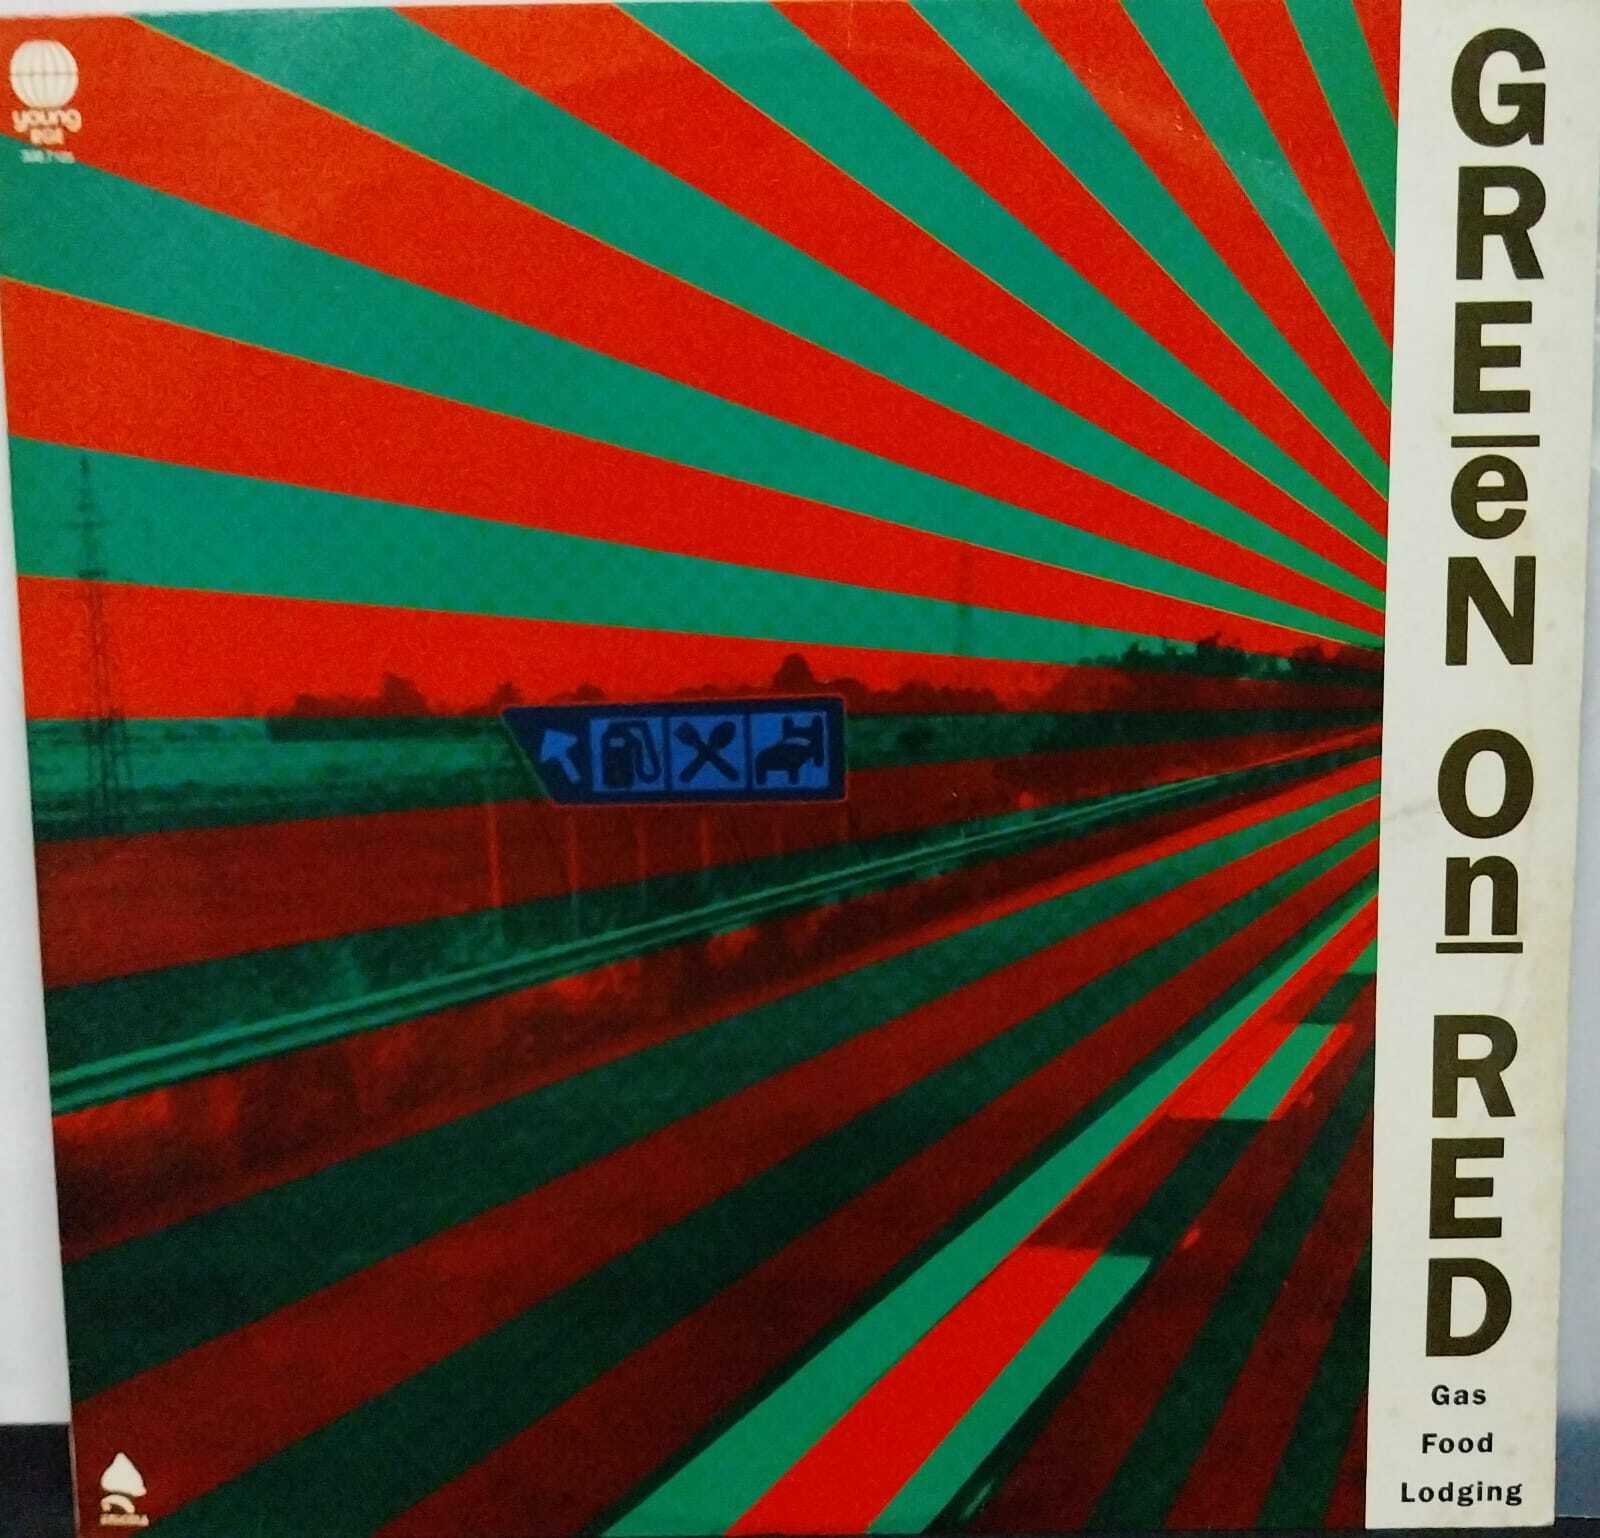 Vinil - Green On Red - Gas Food Lodging